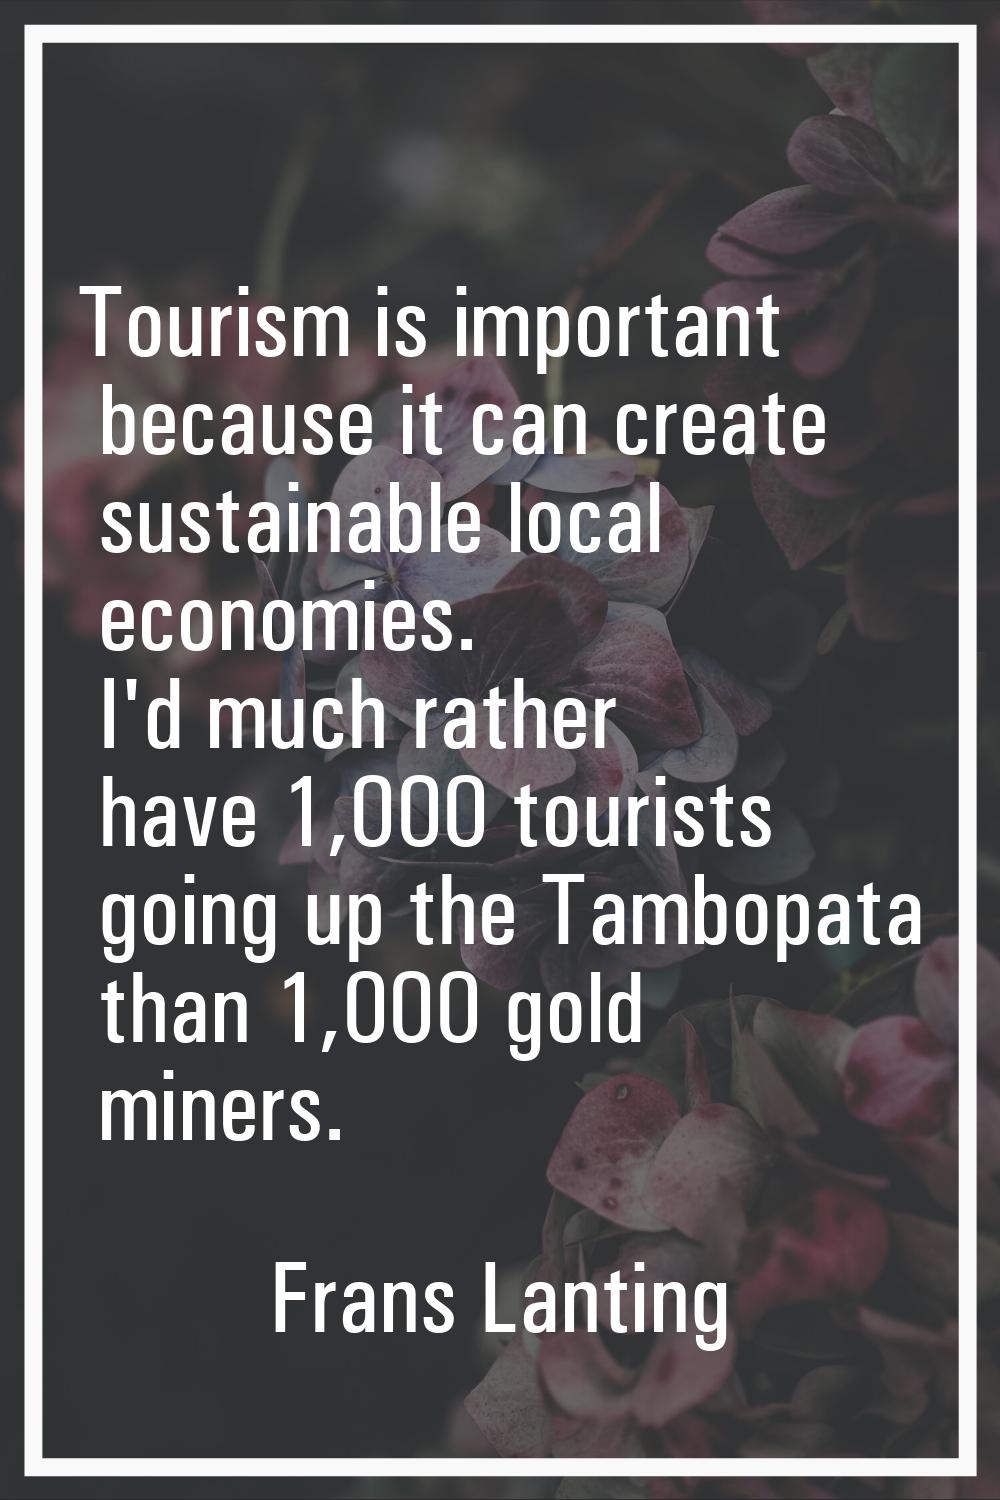 Tourism is important because it can create sustainable local economies. I'd much rather have 1,000 